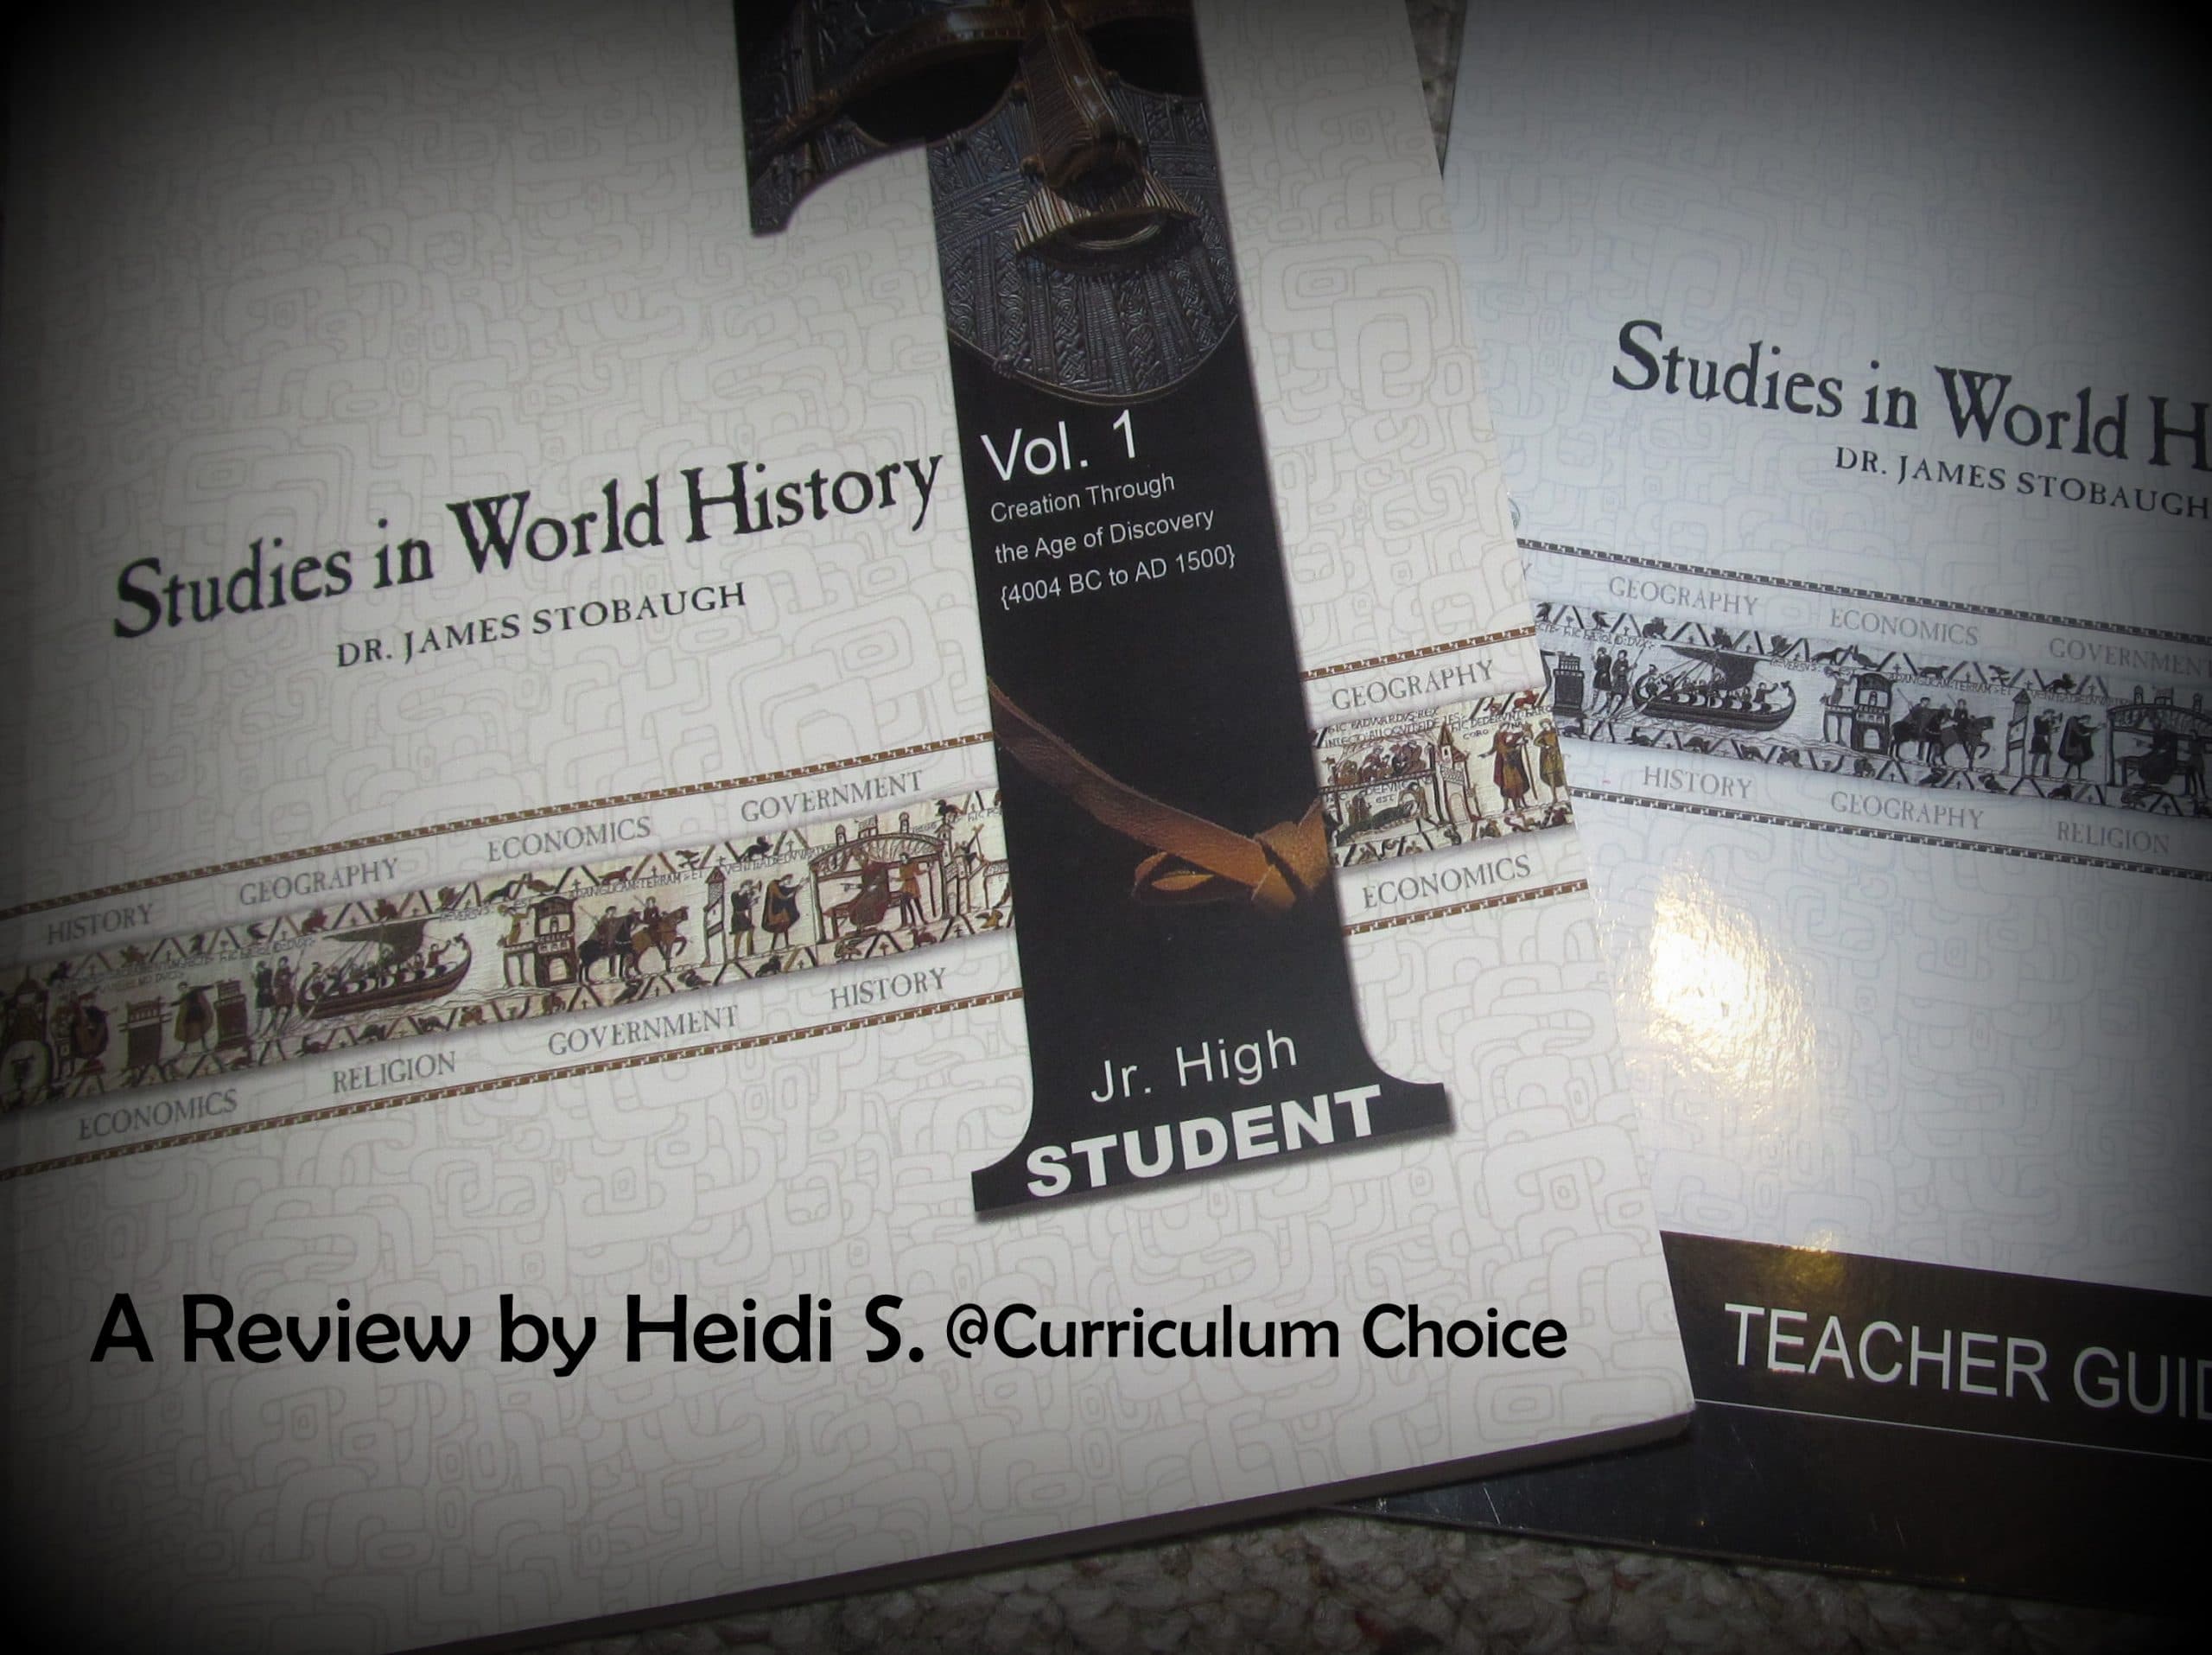 Studies in World History Vol. 1 – A Review